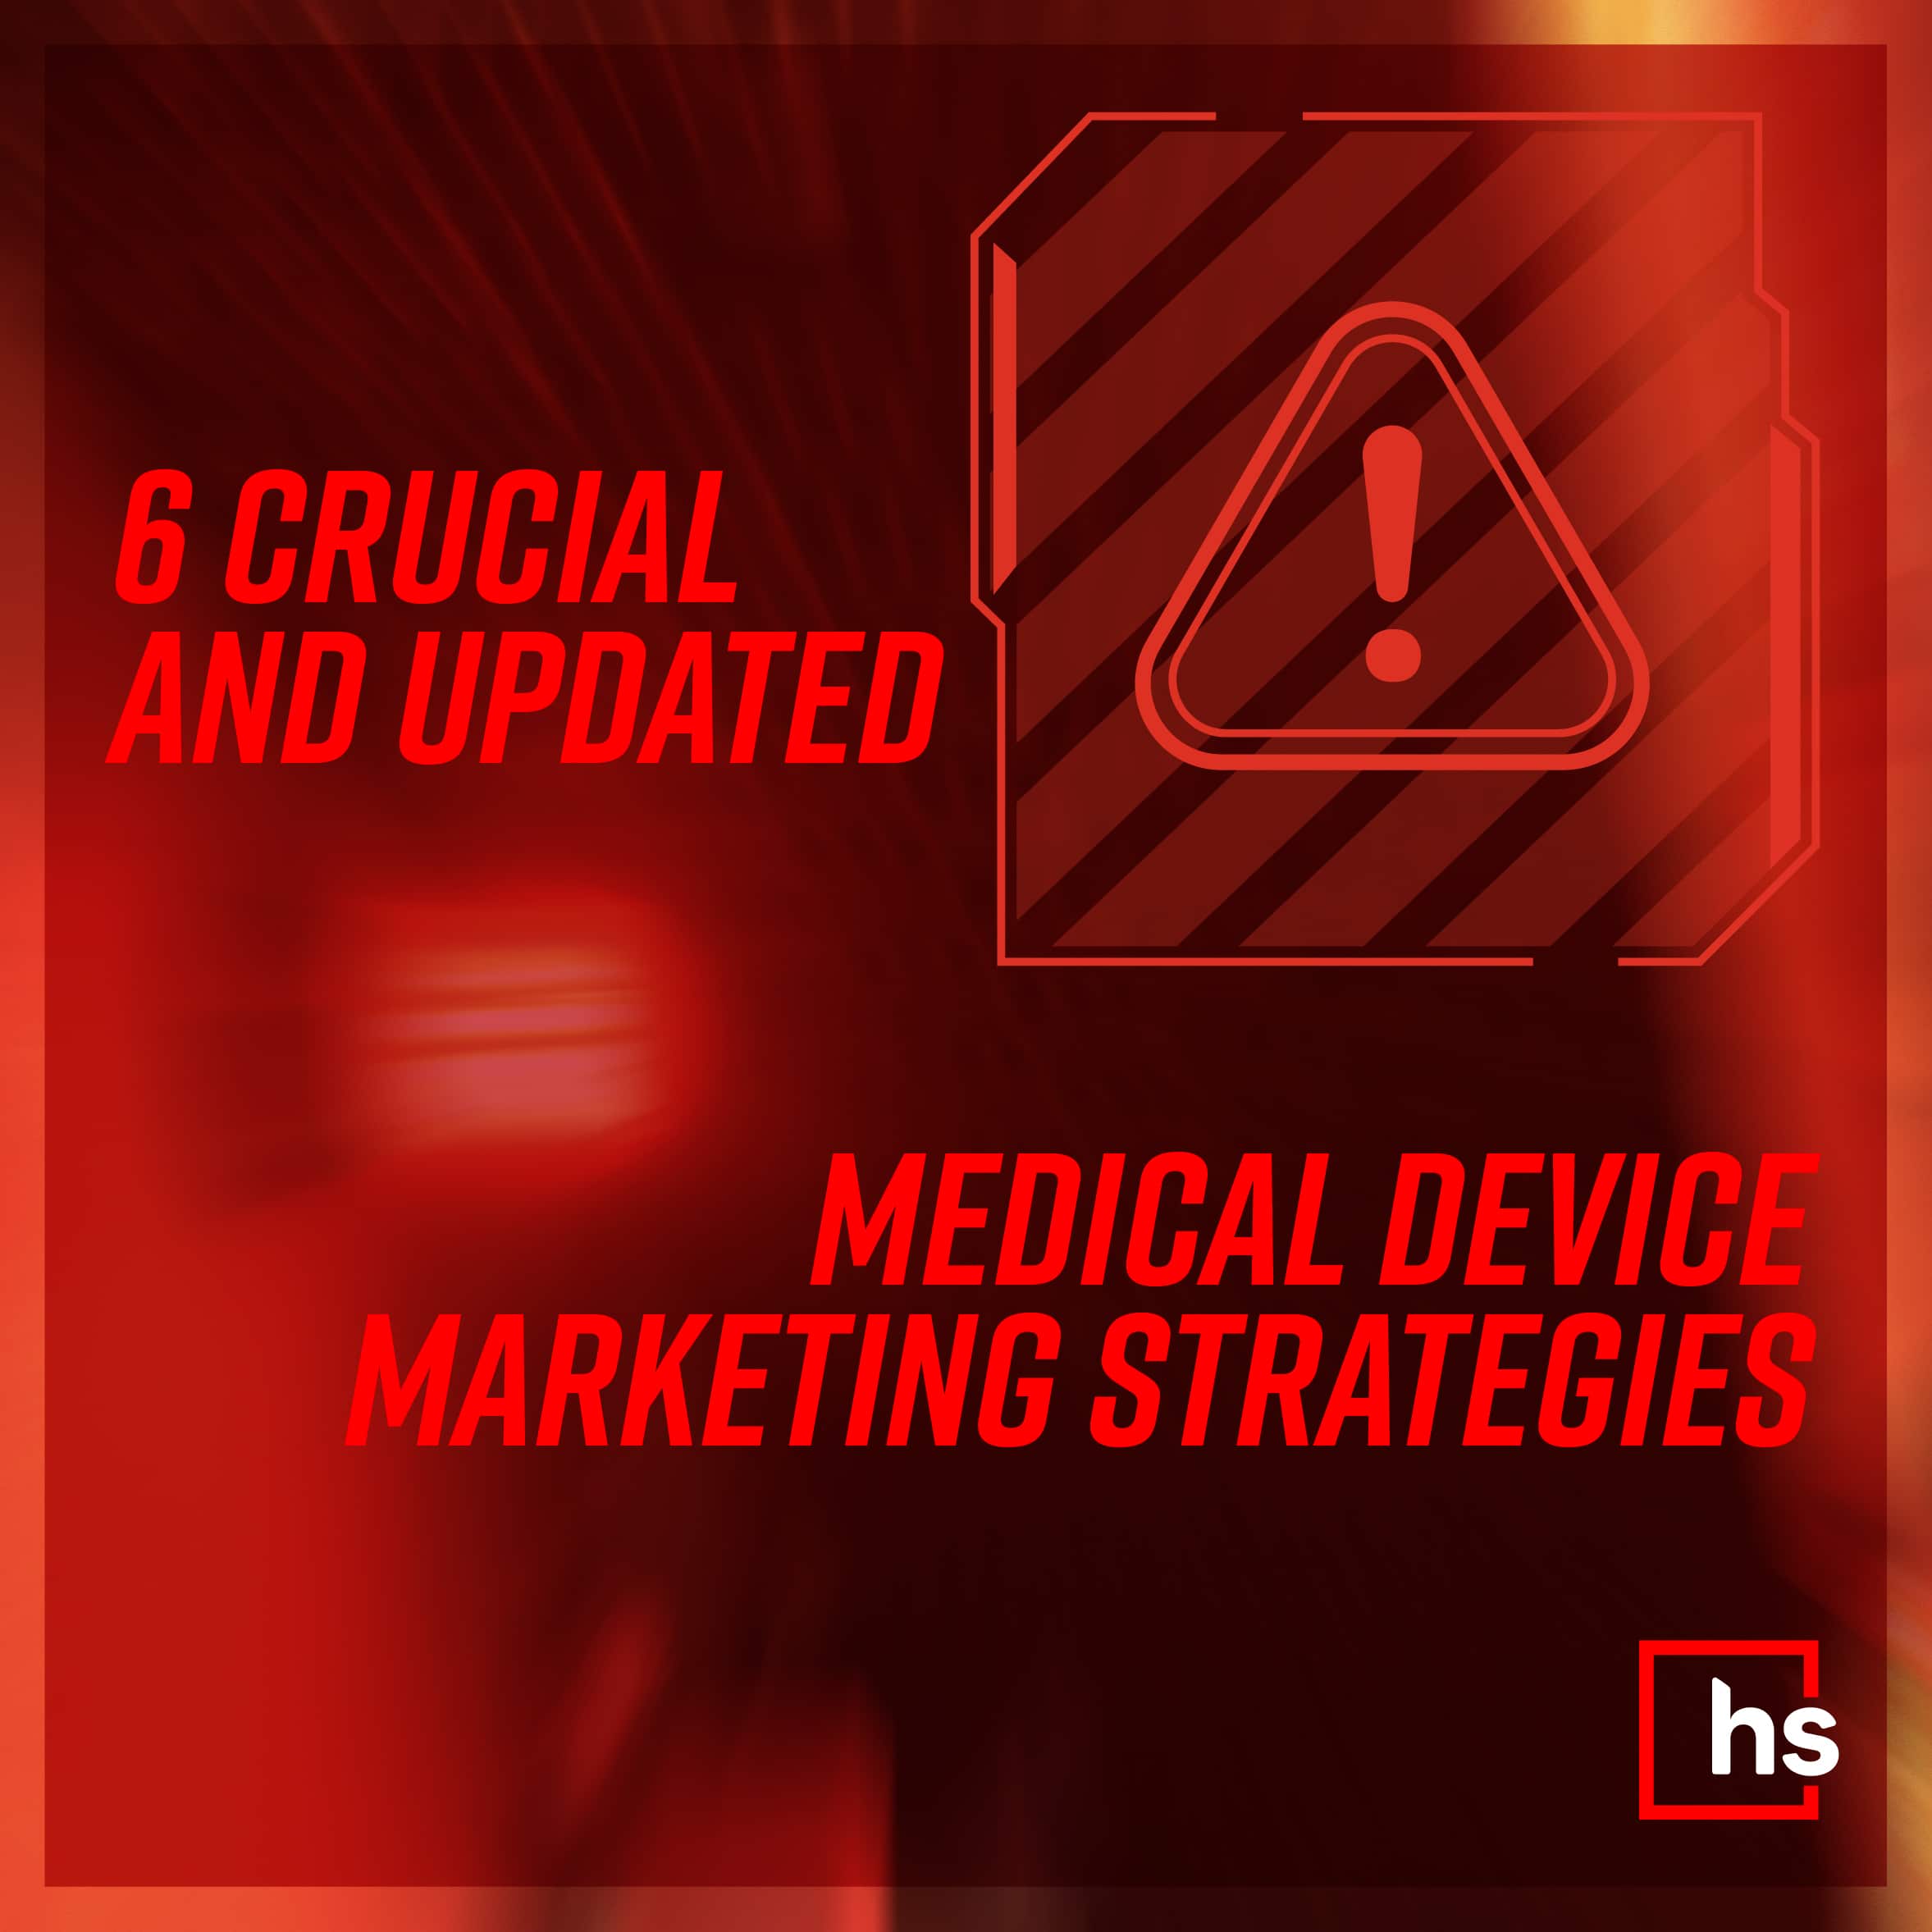 6 Crucial & Updated Medical Device Marketing Strategies